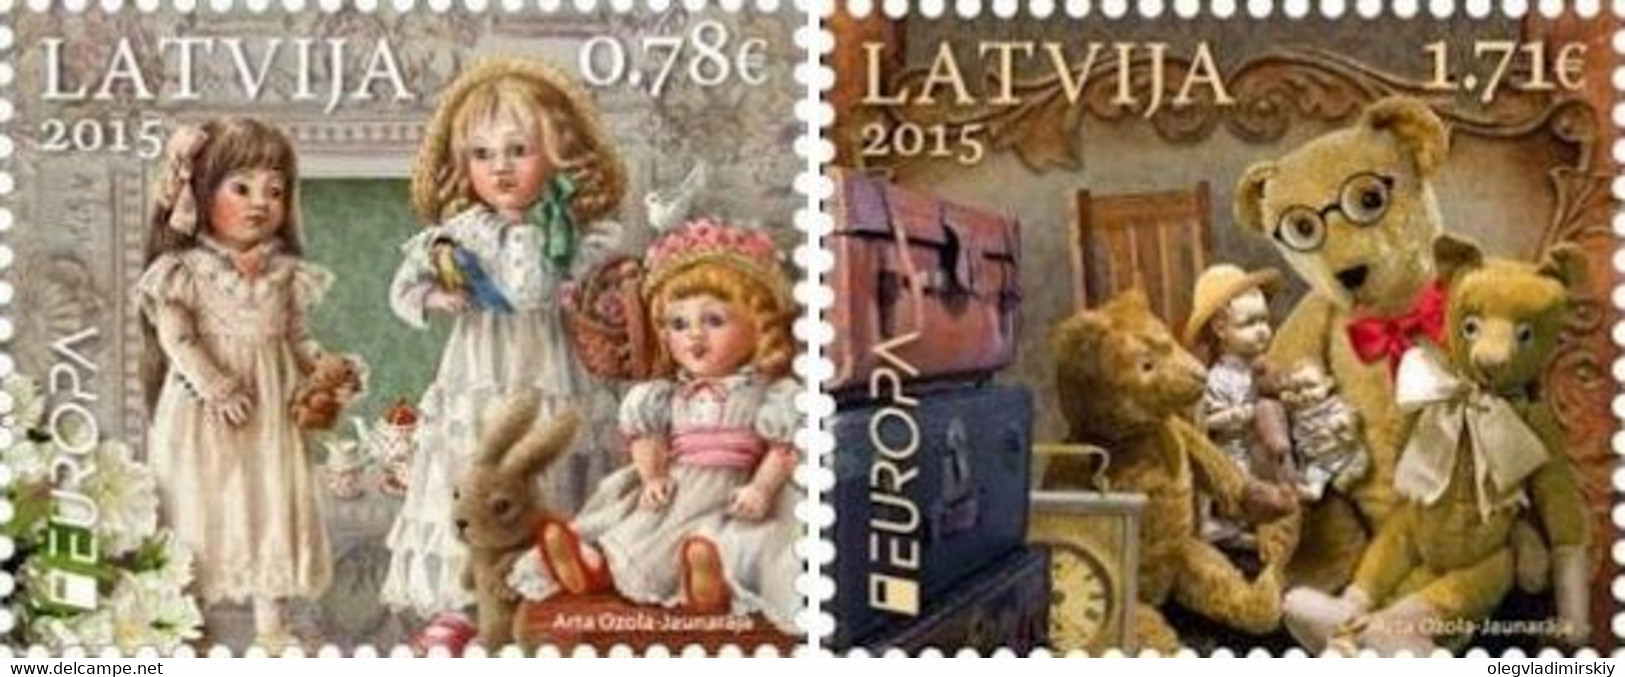 Latvia 2015 Europa CEPT Old Toys Set Of 2 Stamps Mint - Puppen